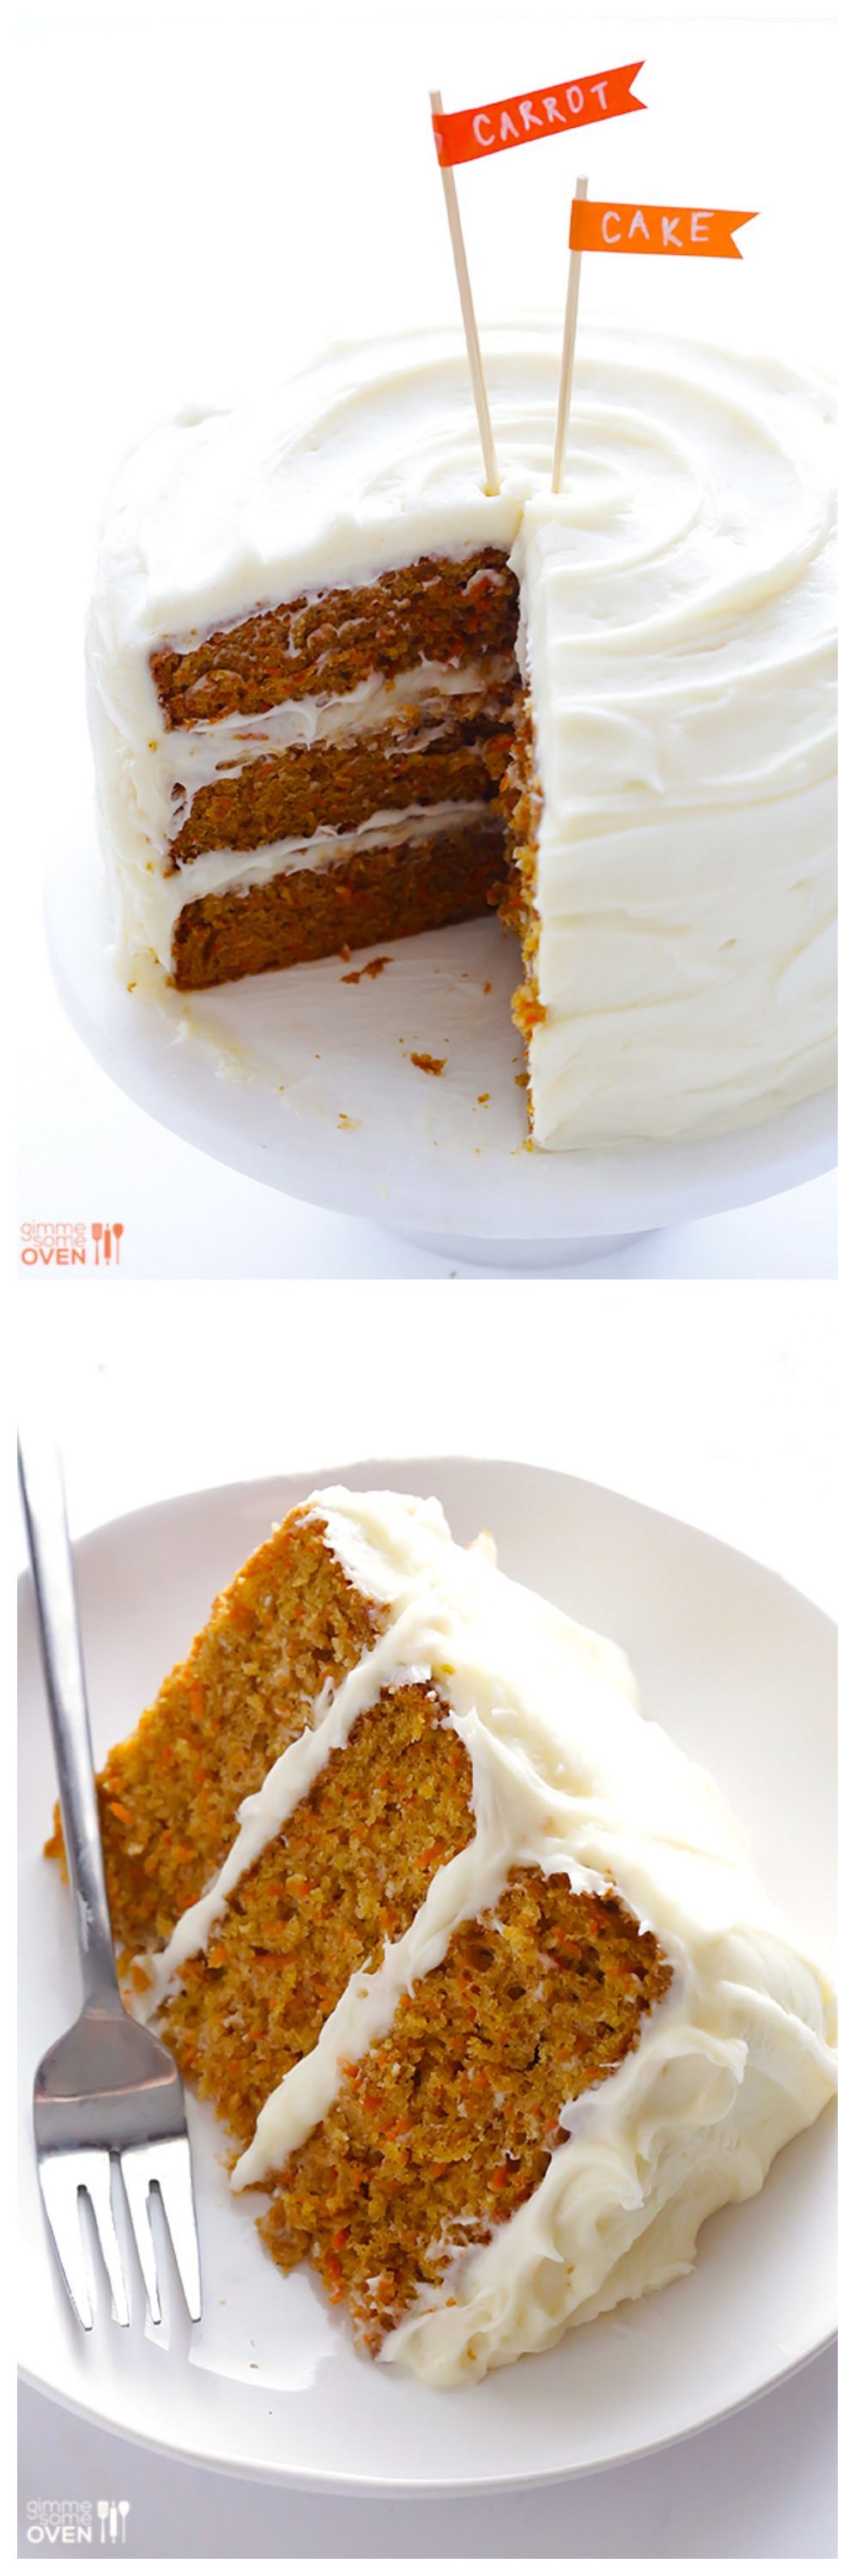 The BEST Carrot Cake Recipe — it’s moist, delicious, and topped with a heavenly cream cheese frosting